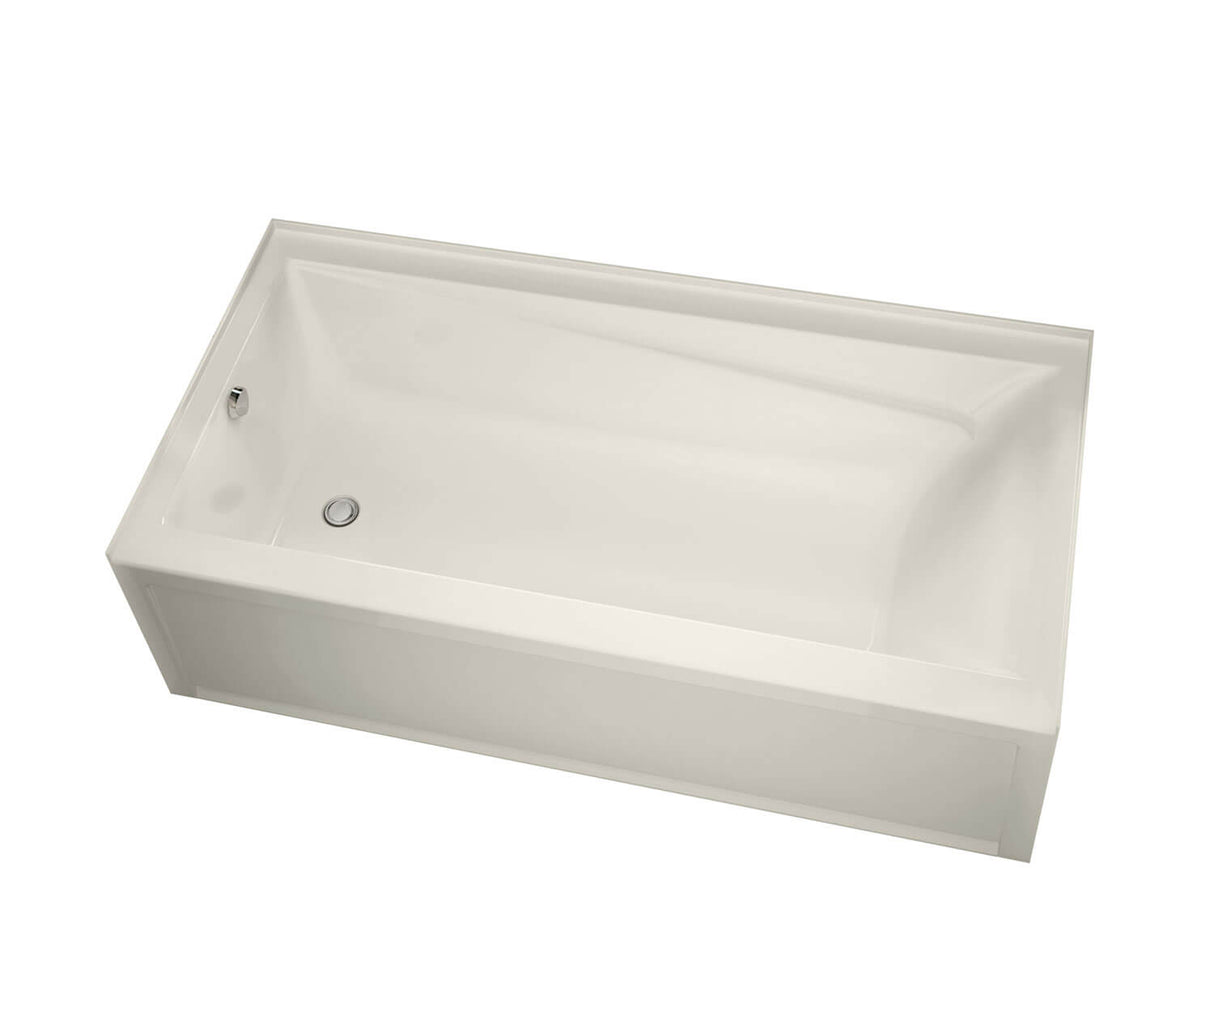 MAAX 106175-000-007-101 Exhibit 6042 IFS Acrylic Alcove Right-Hand Drain Bathtub in Biscuit